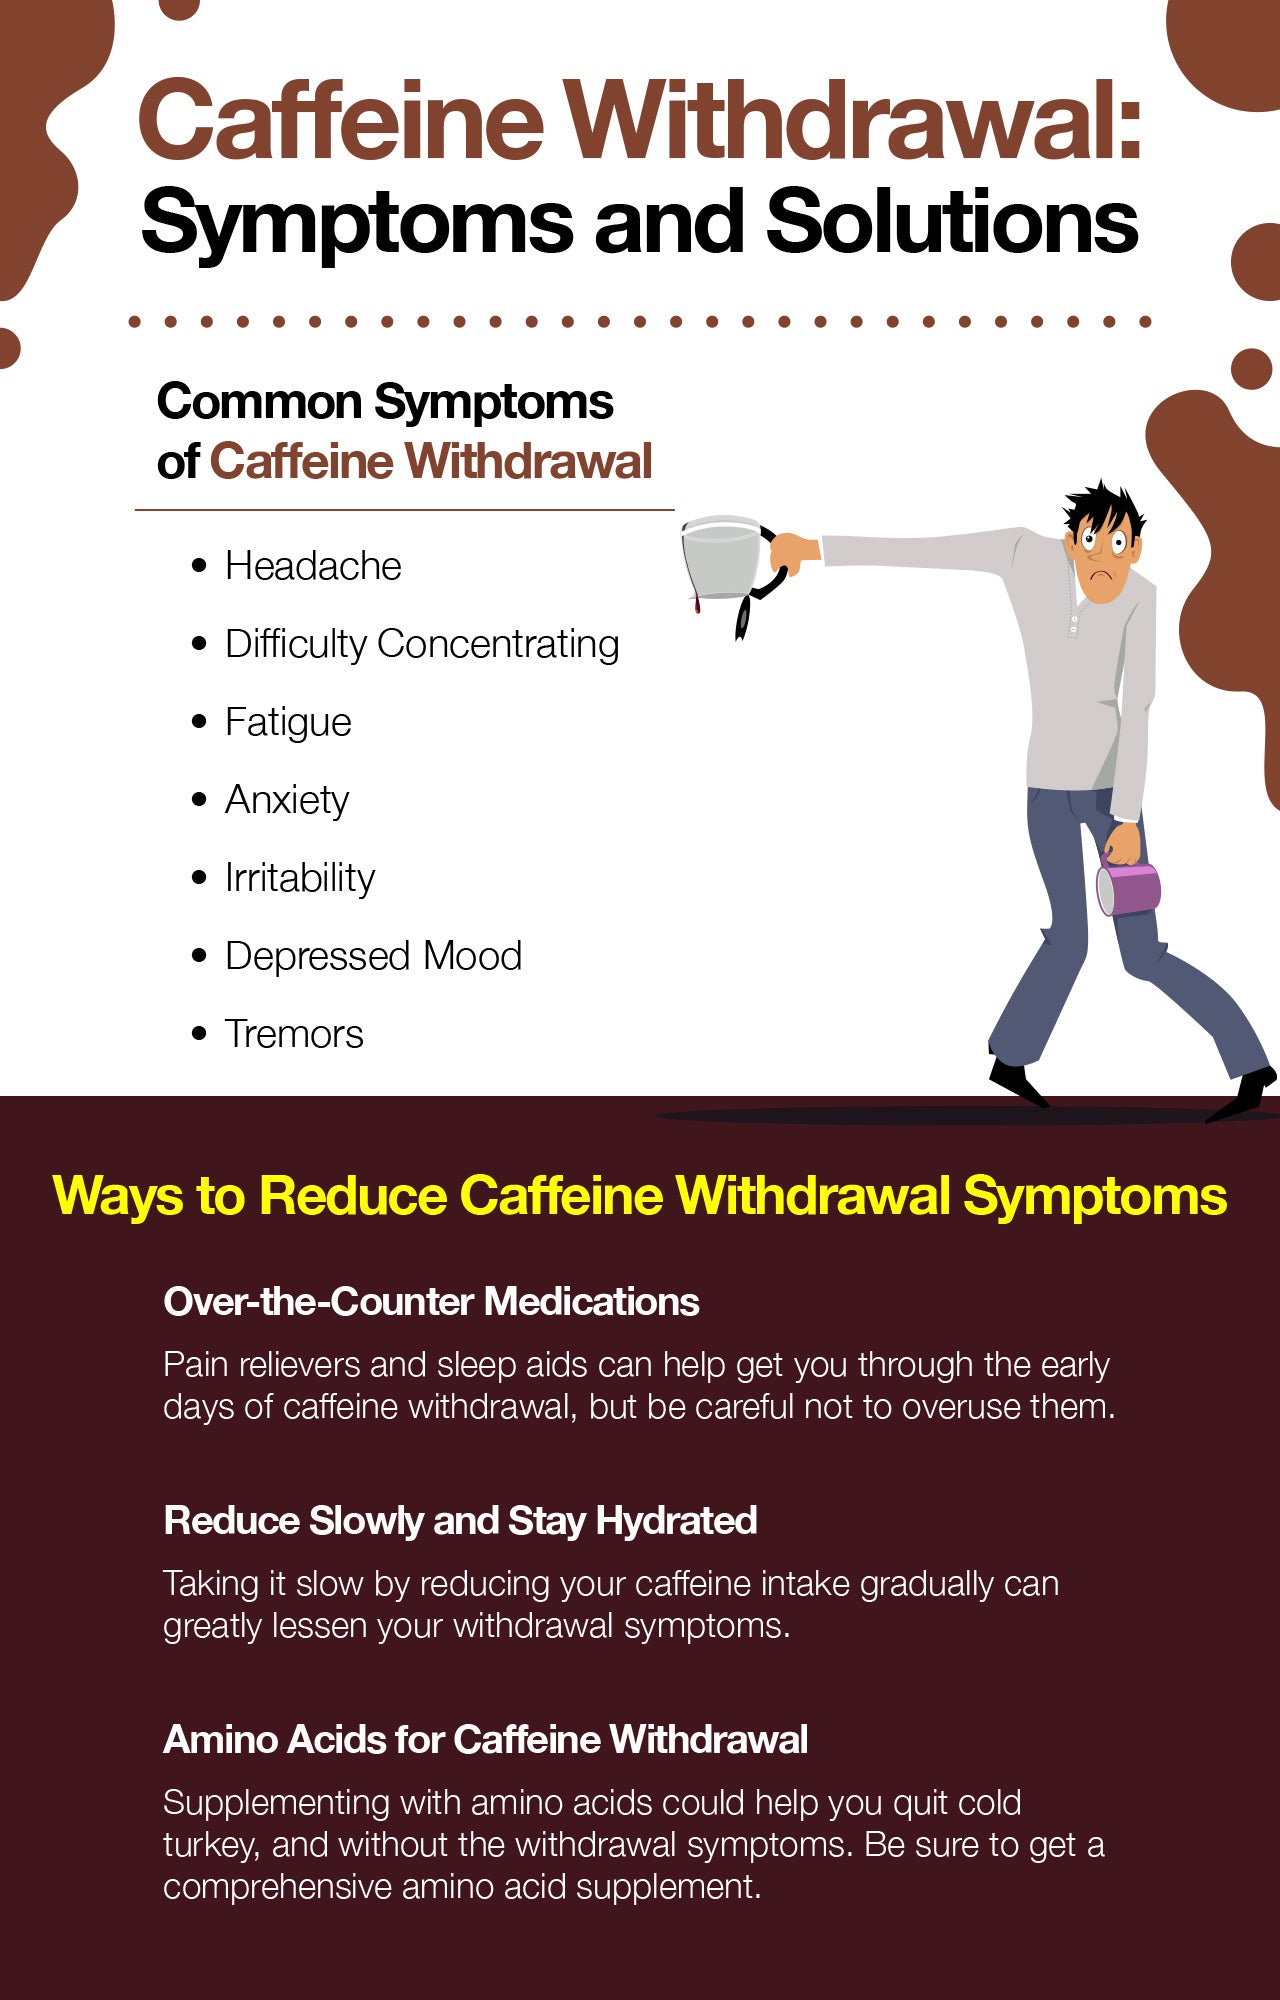 Can Caffeine Withdrawal Cause Fast Heart Rate?